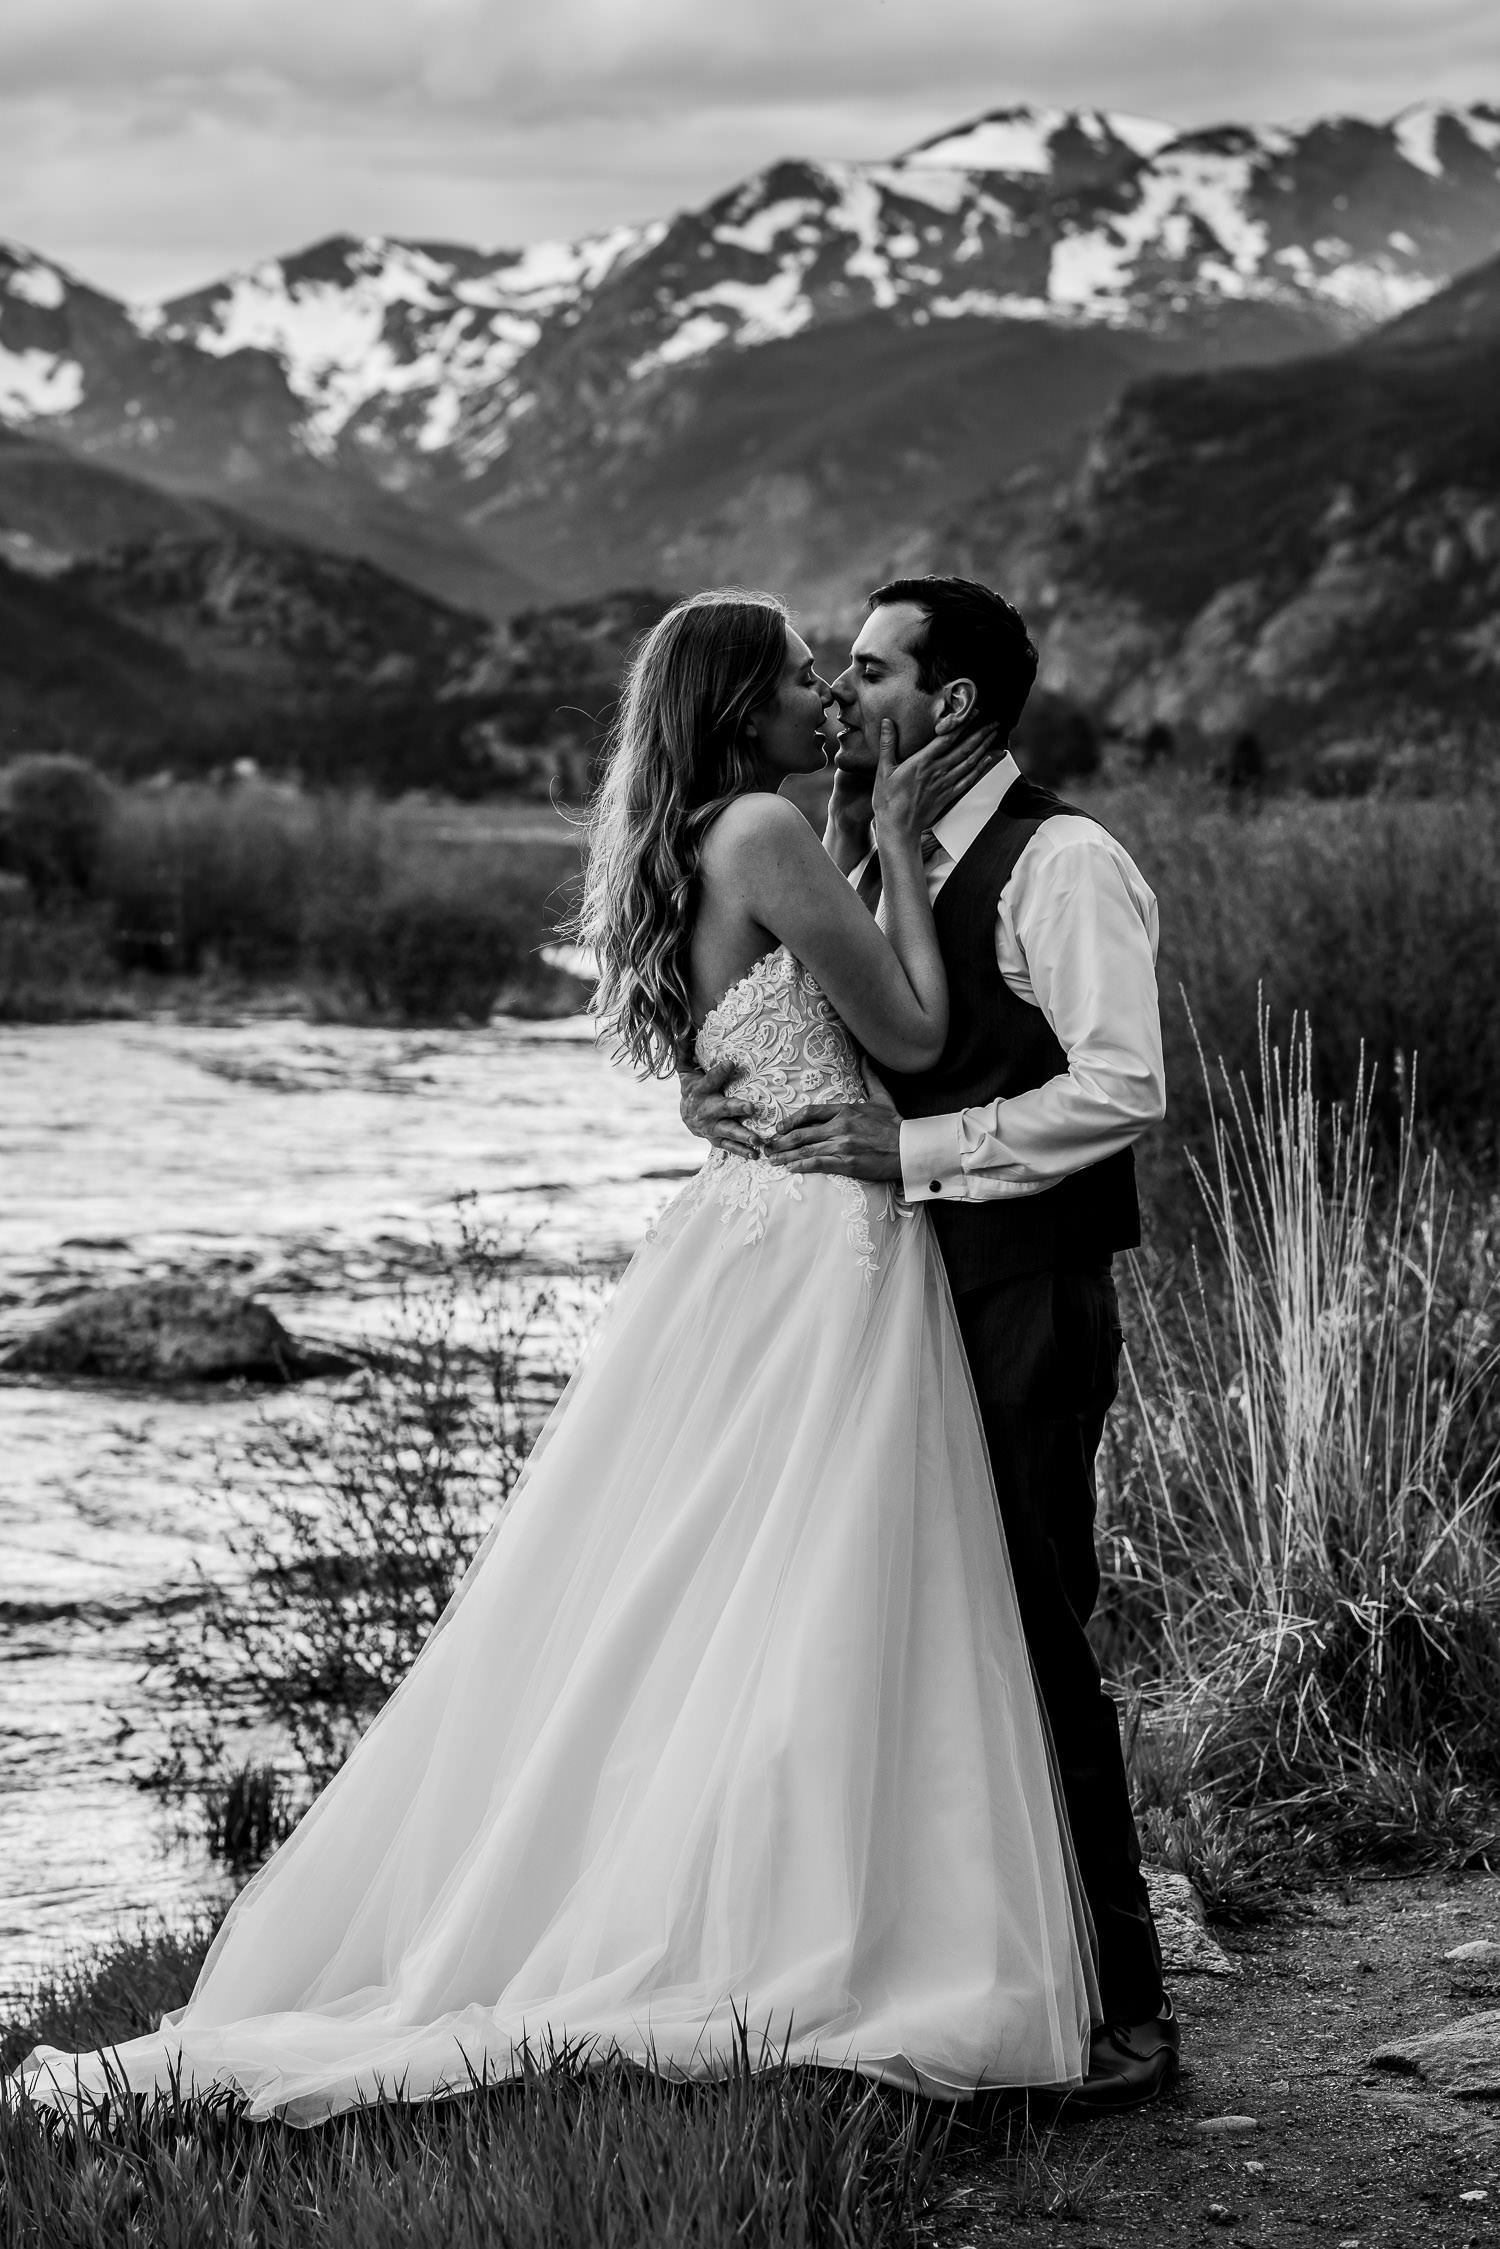 Newlyweds near a stream in the mountains